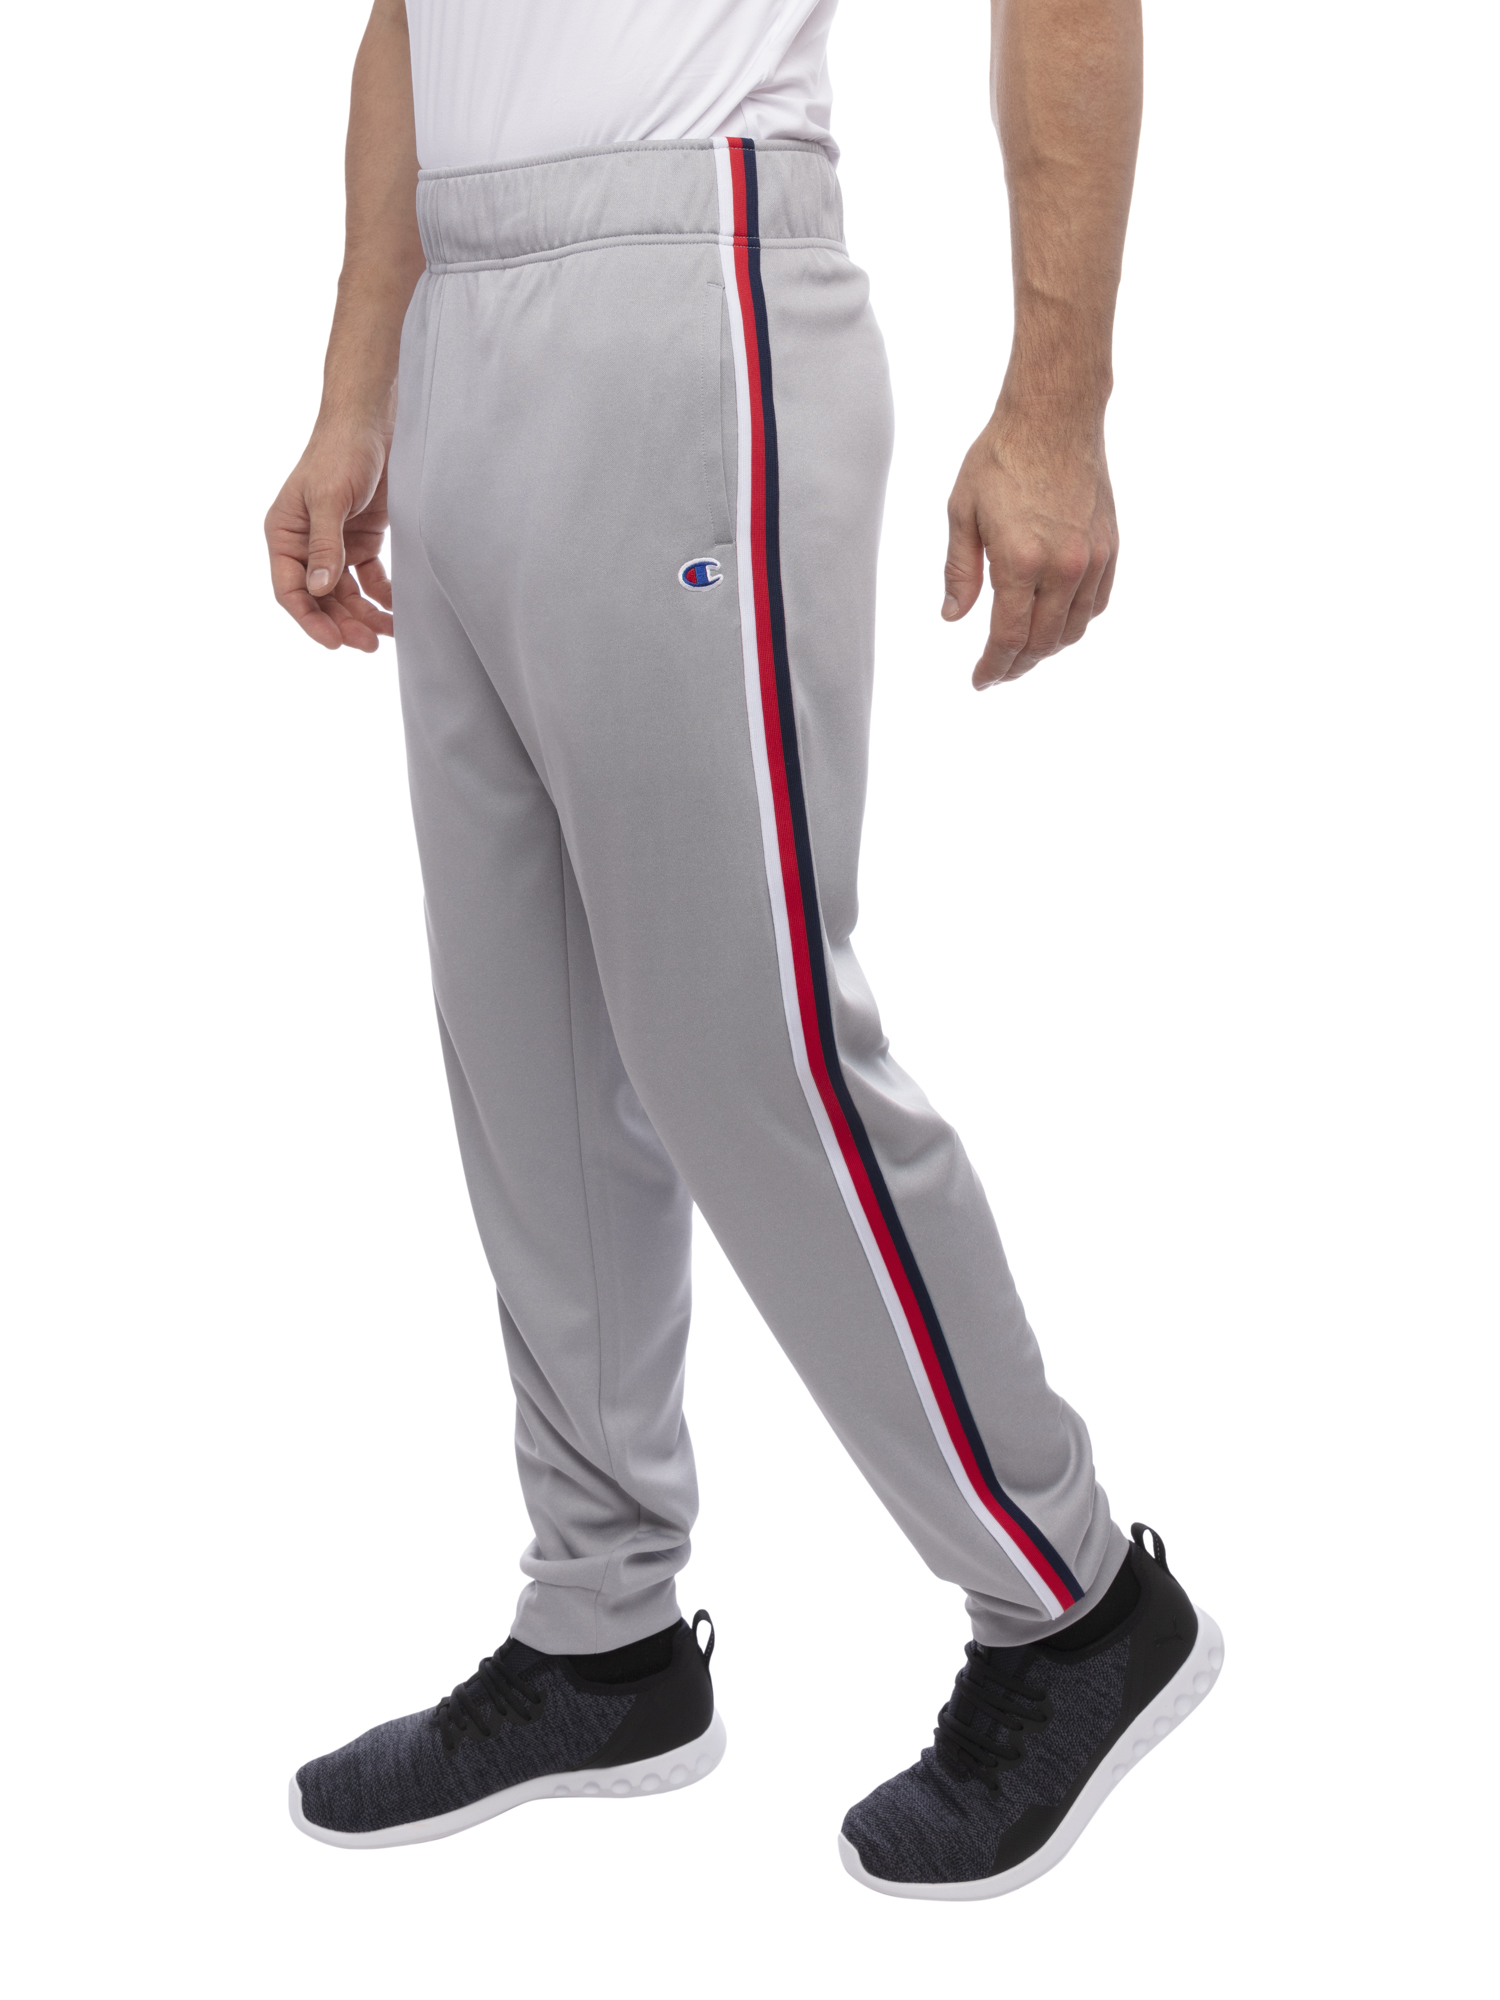 Champion Walmart Exclusive Men's Track Pant, up to Size 2XL - image 1 of 5